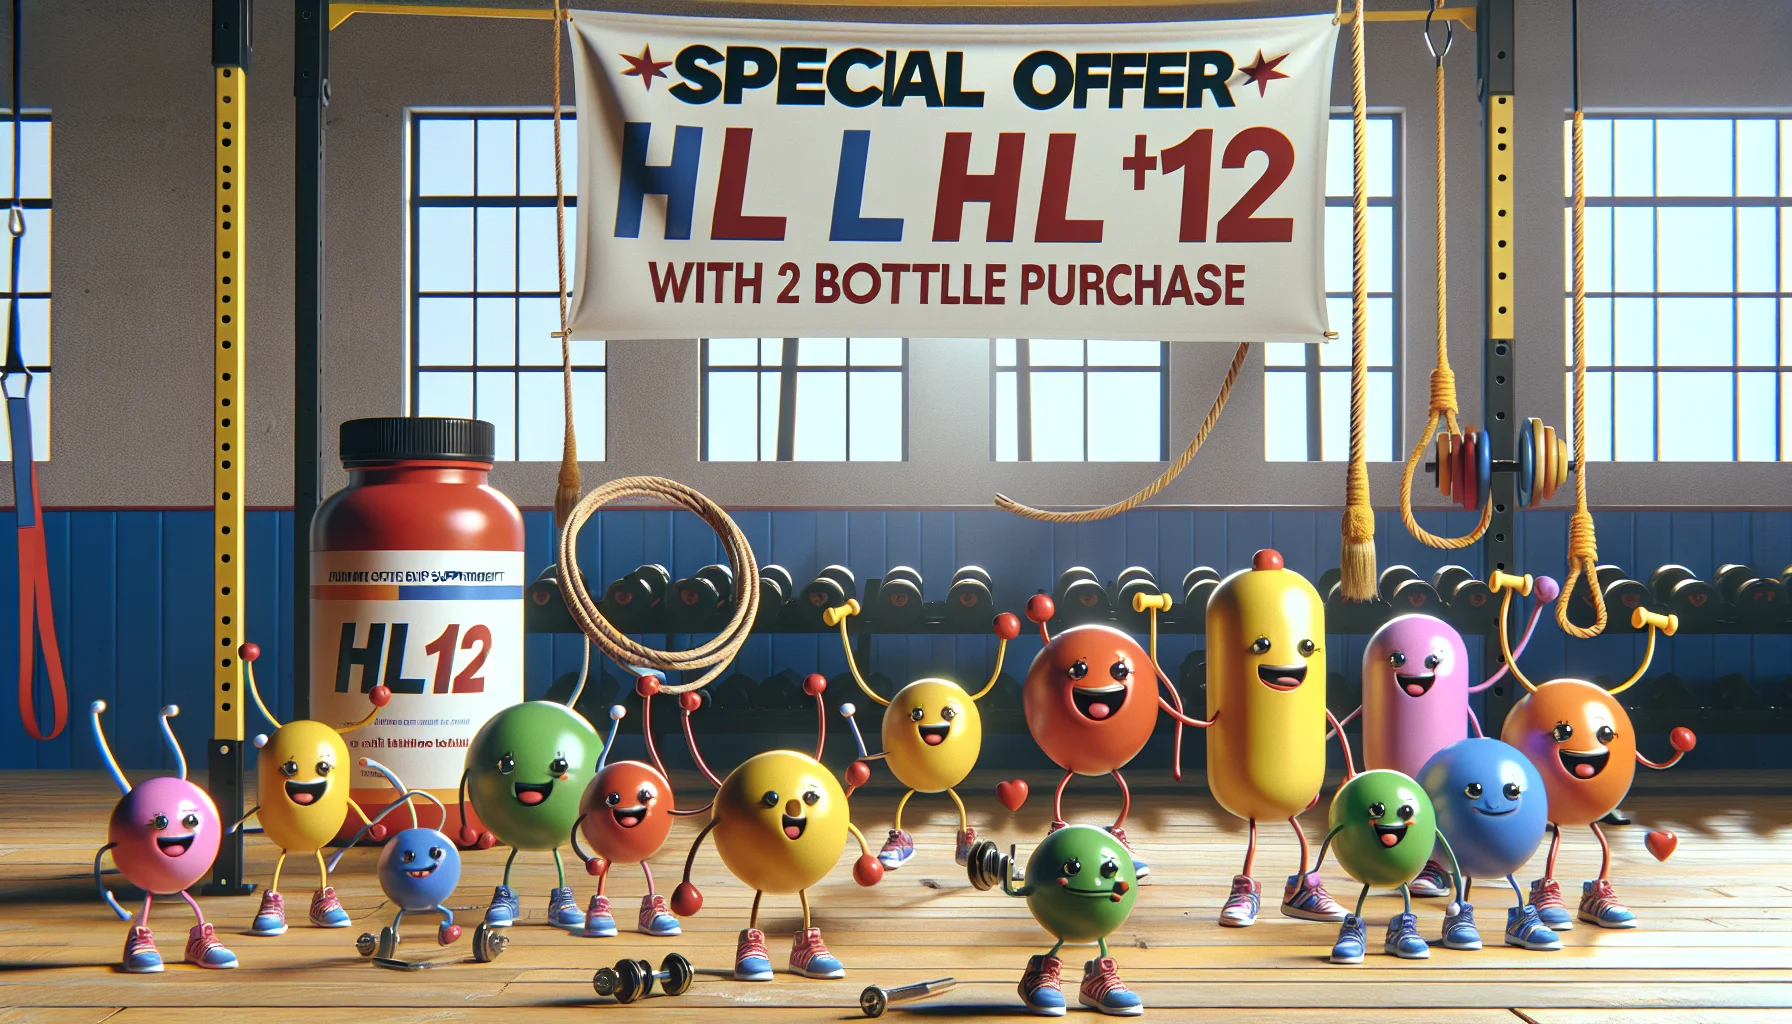 Create a humorous and realistic scene that encourages physical activity, featuring a special promotion of a health supplement called 'HL12'. Imagine this image depicting a wide array of playful gym equipment in bright colors, with a large eye-catching banner across the scene stating 'Special Offer: HL12 Supplement with 2 Bottle Purchase'. Perhaps an array of personified sports equipment such as a skipping rope joyfully skipping, or a barbell trying to lift another smaller barbell, each with animated features like eyes and smiles, could add a layer of humor and fun to the scene.